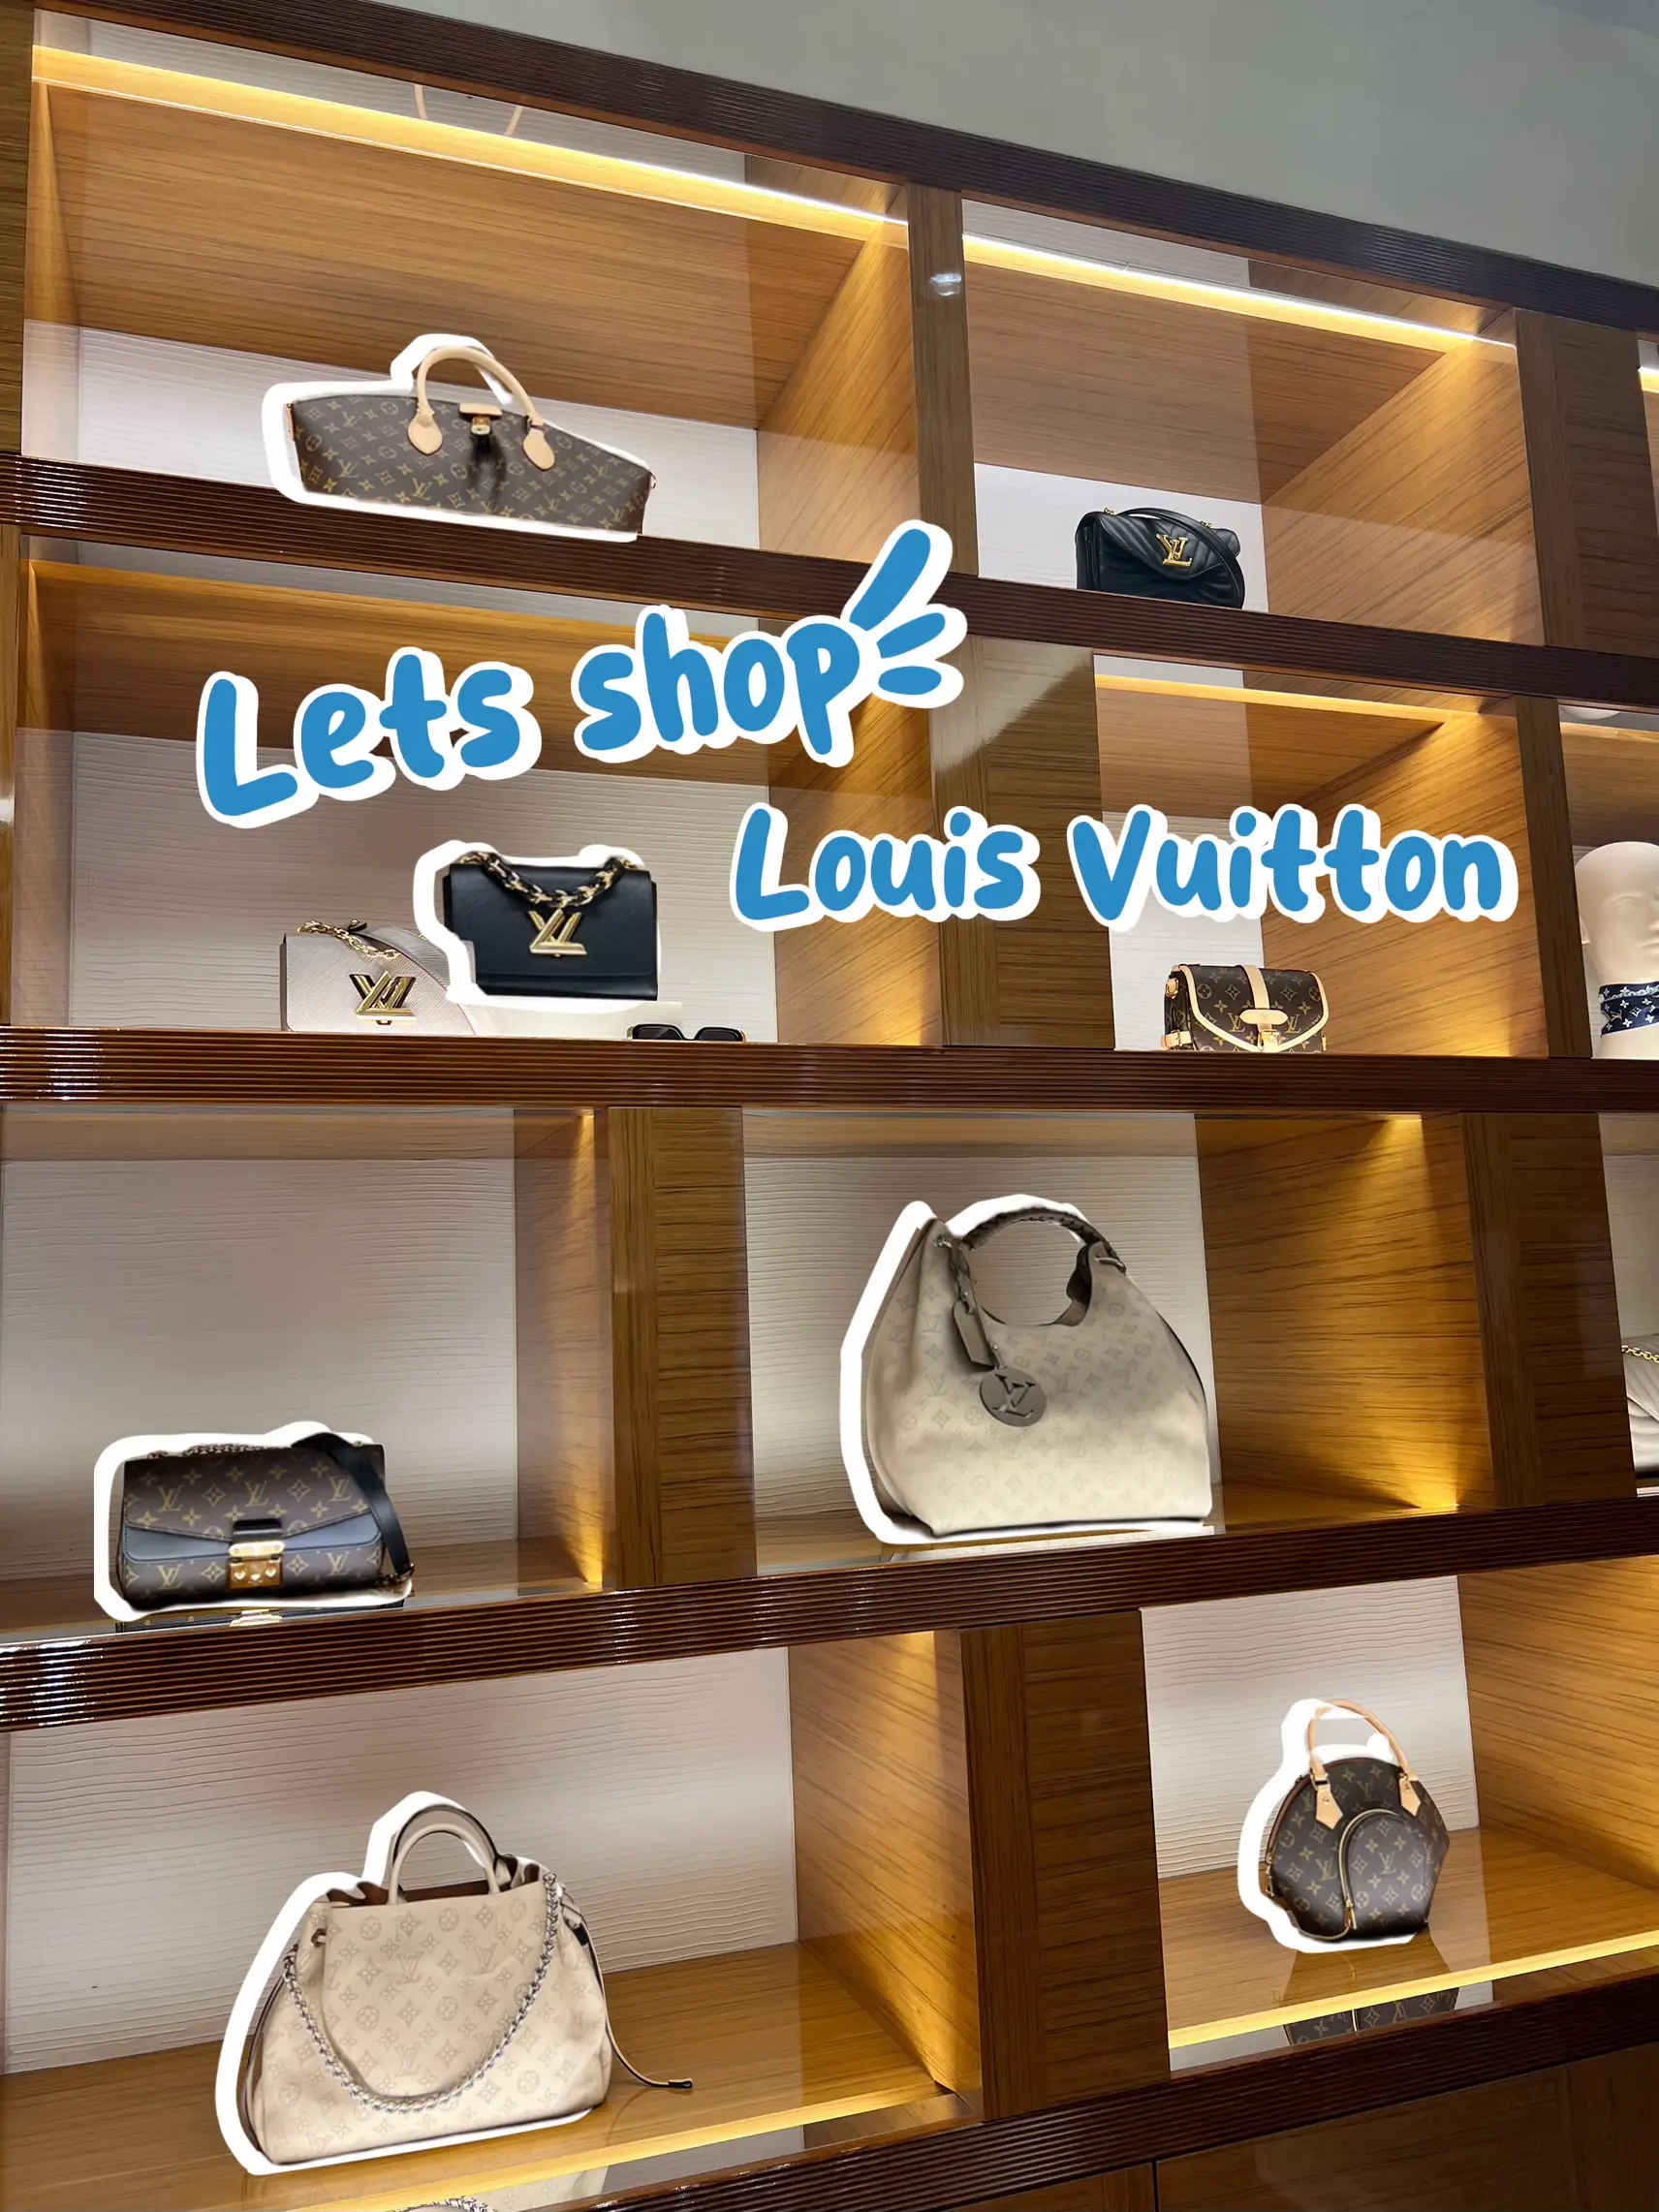 AFFORDABLE LOUIS VUITTON BAG DUPES FROM CONTEMPORARY DESIGNERS